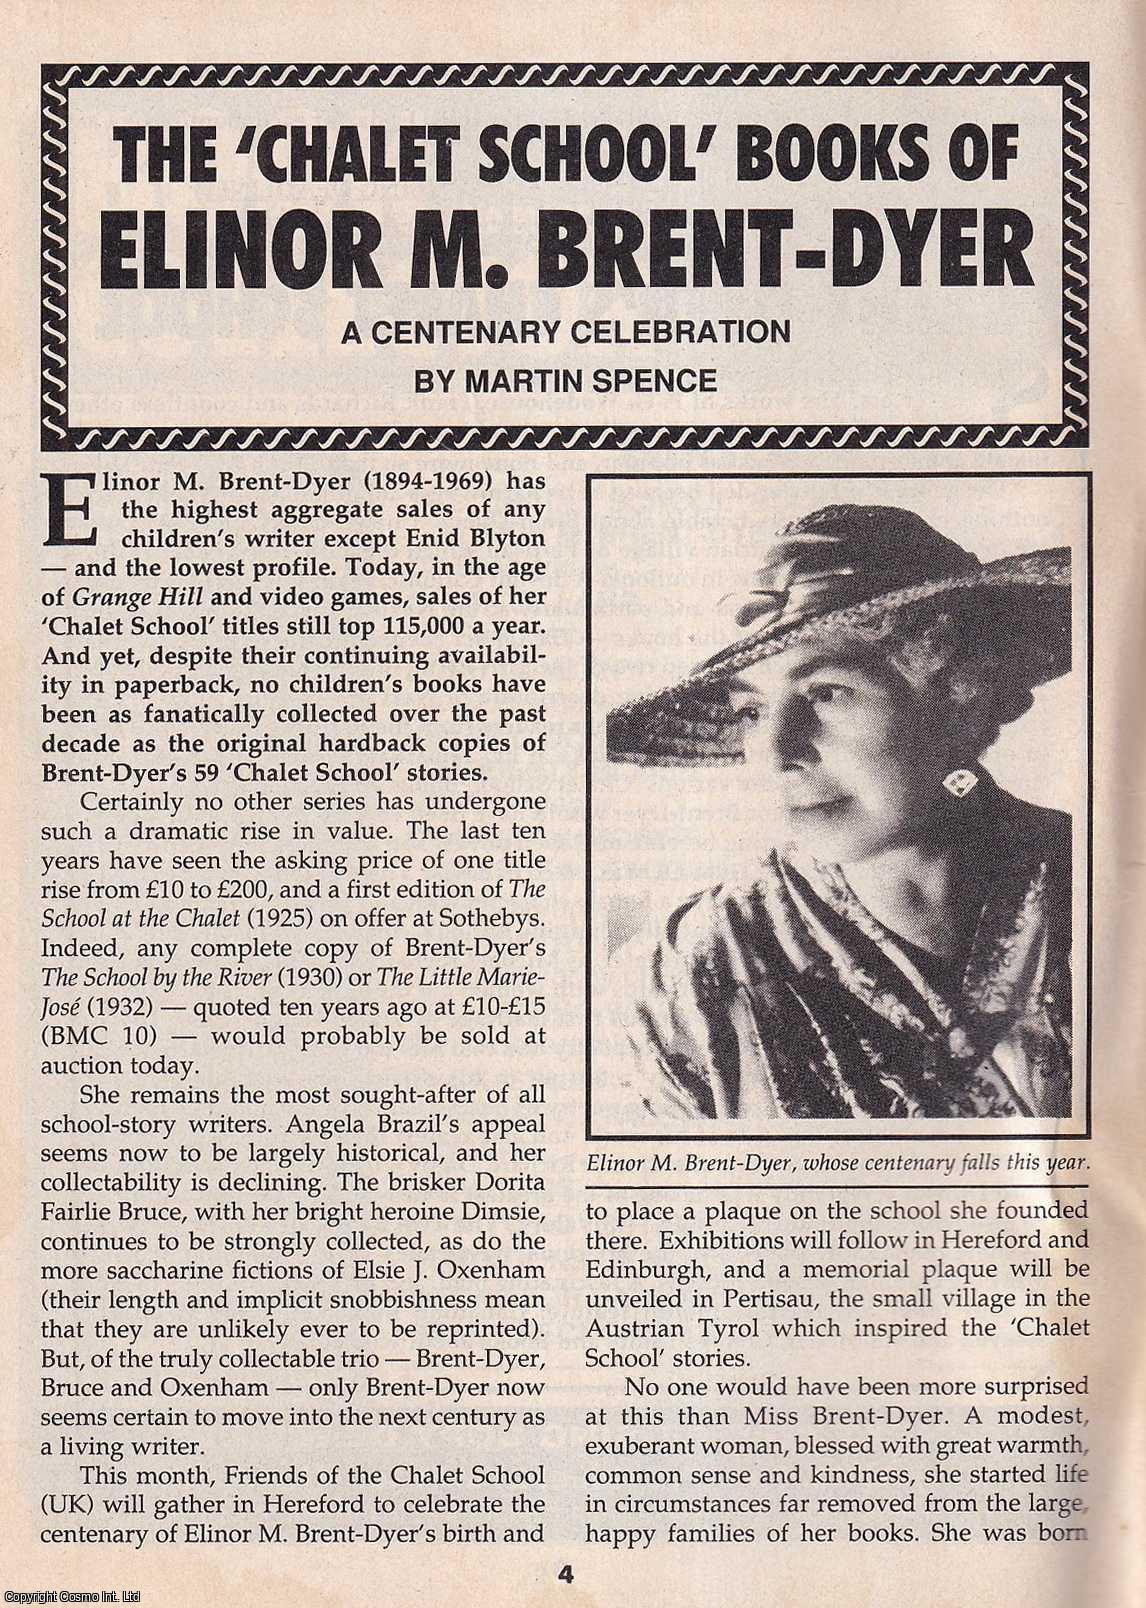 Martin Spence - The Chalet School Books of Elinor M. Brent-Dyer. A Centenary Celebration. This is an original article separated from an issue of The Book & Magazine Collector publication.